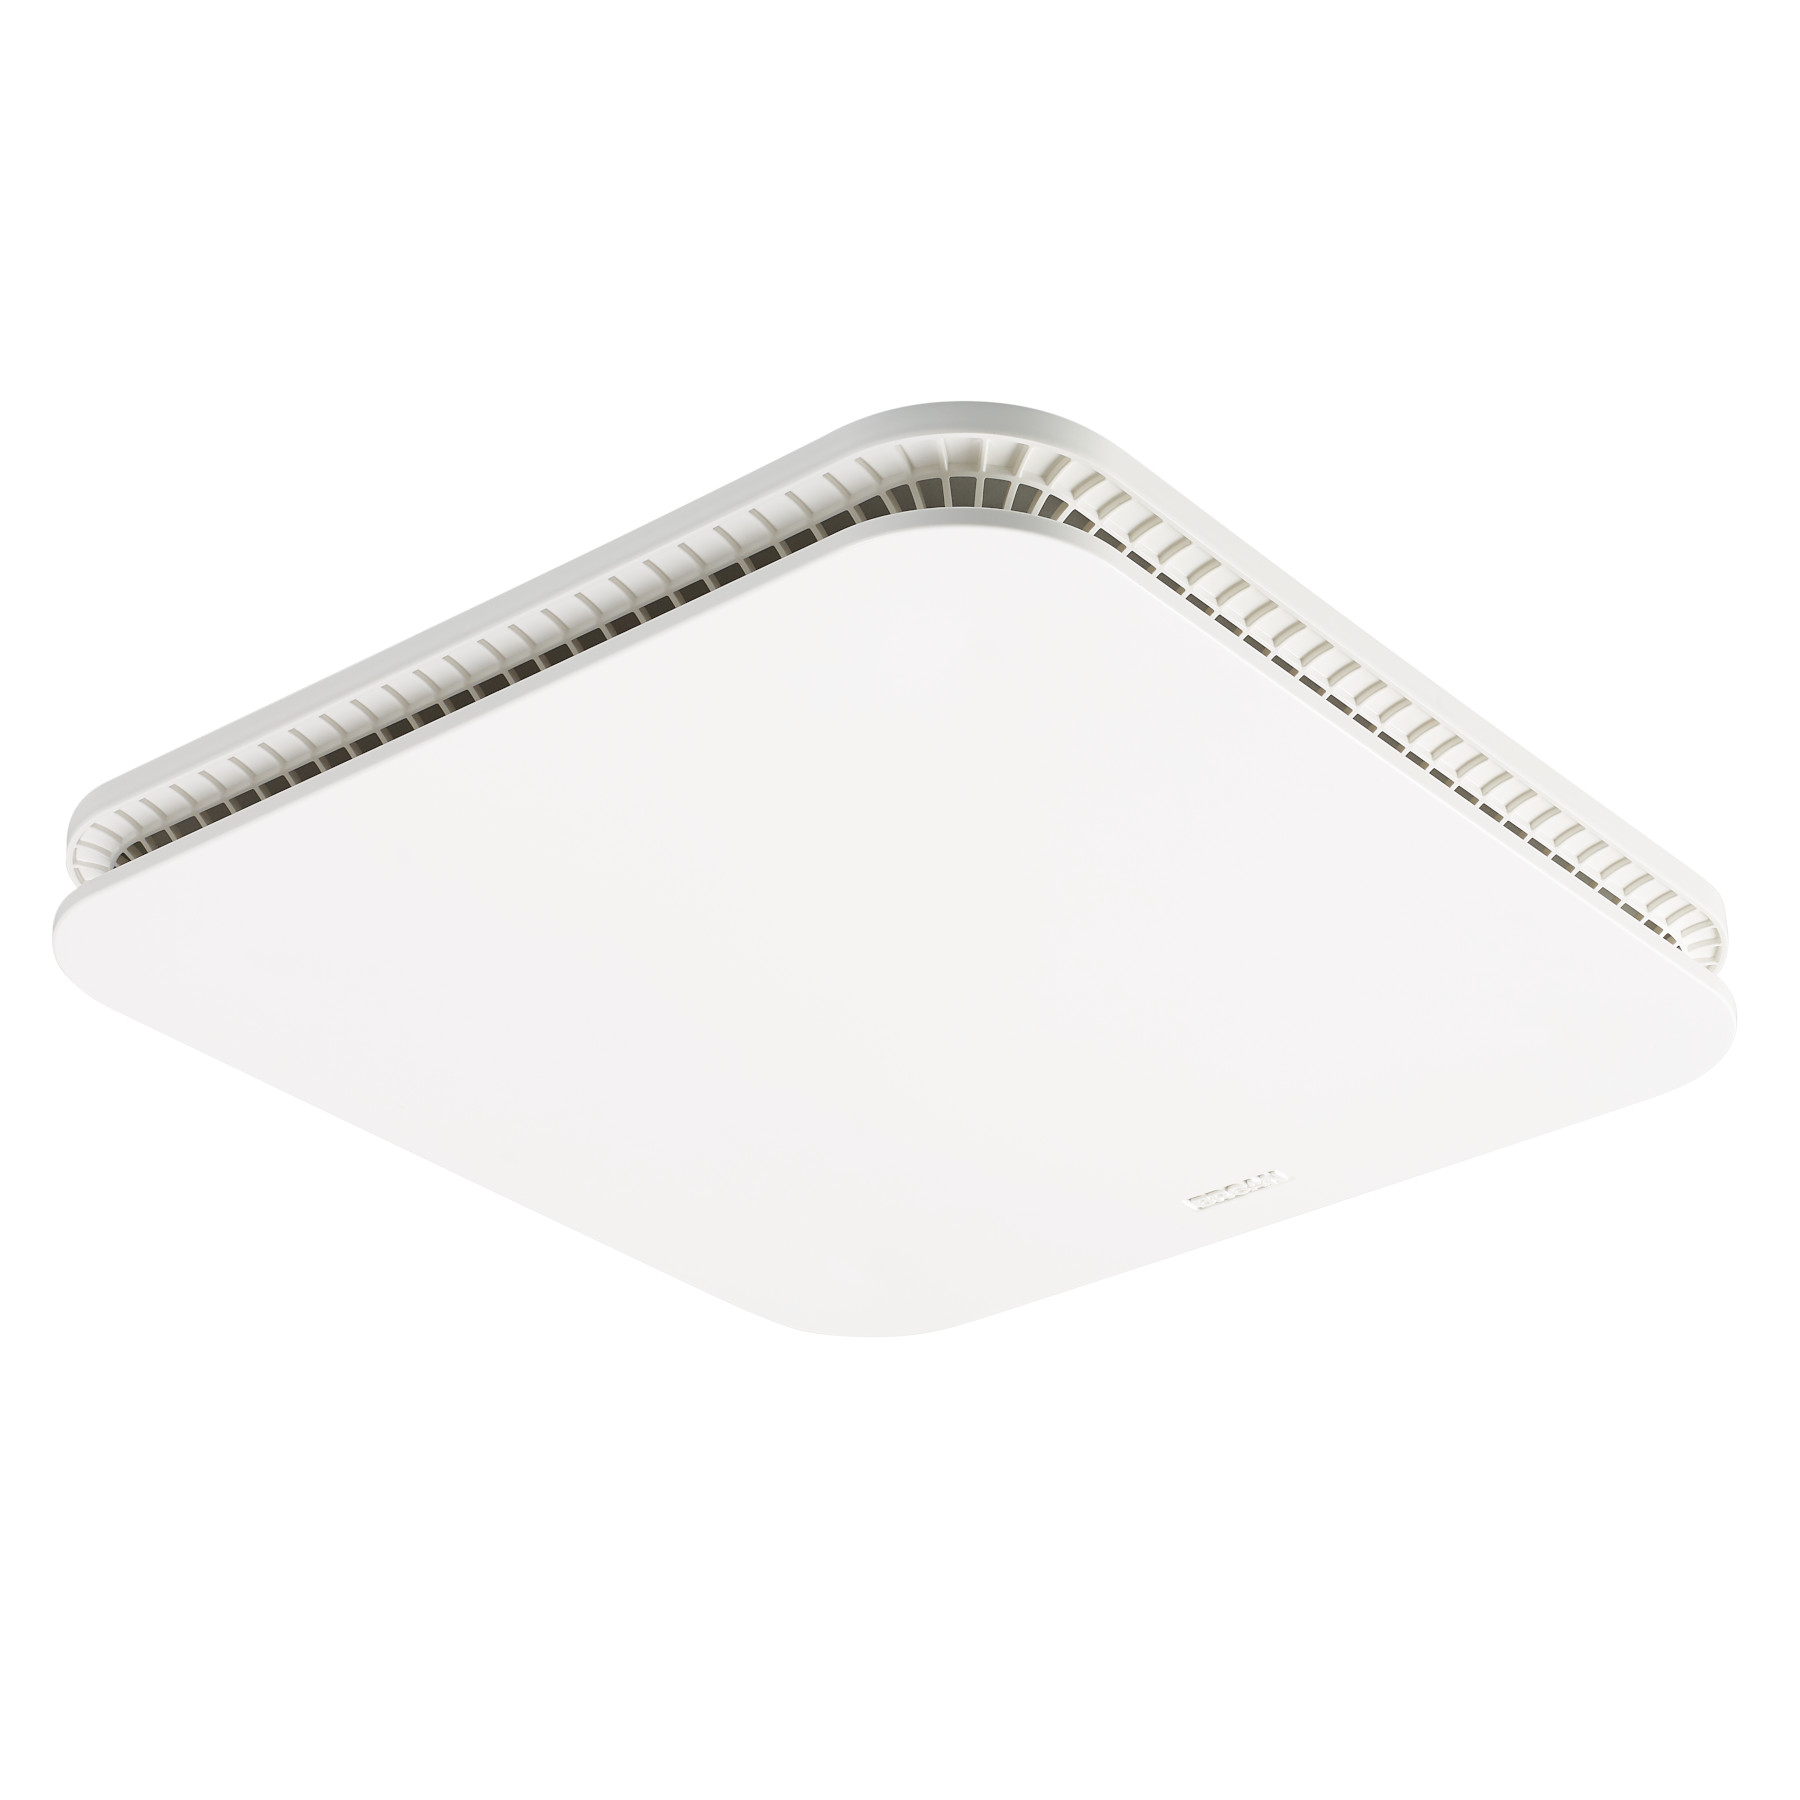 Fg701s Broan Universal Cleancover Bathroom Exhaust Fan Upgrade Grille Cover Single Unit